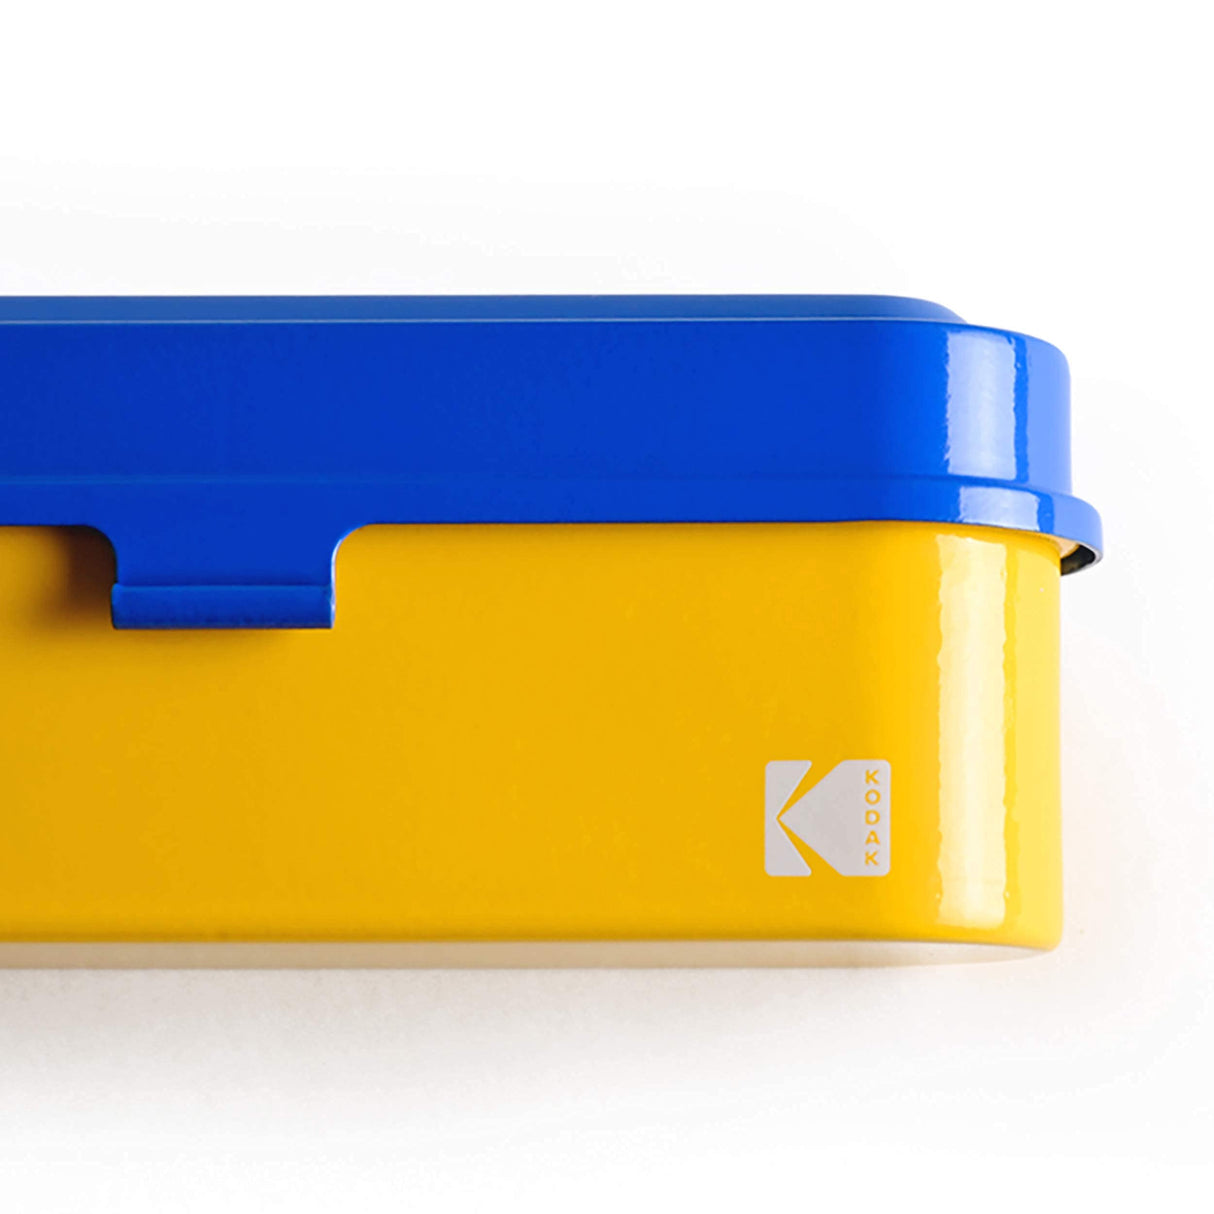 KODAK Film Case - for 5 Rolls of 35mm Films - Compact, Retro Steel Case to Sort and Safeguard Film Rolls (Blue) (Film is not Included)